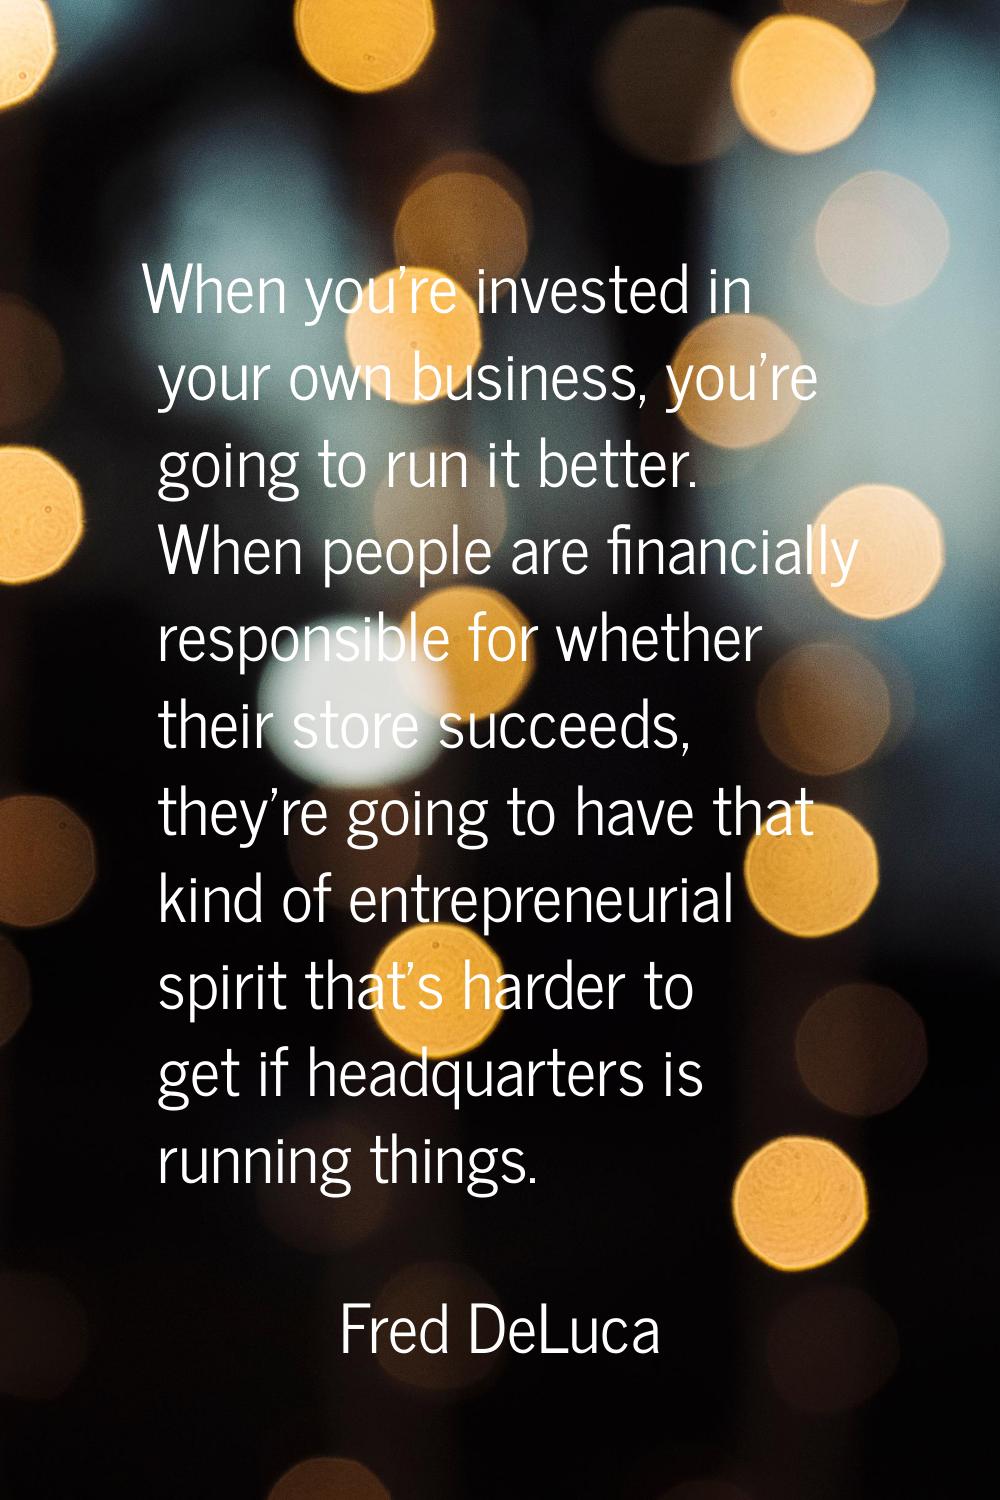 When you're invested in your own business, you're going to run it better. When people are financial